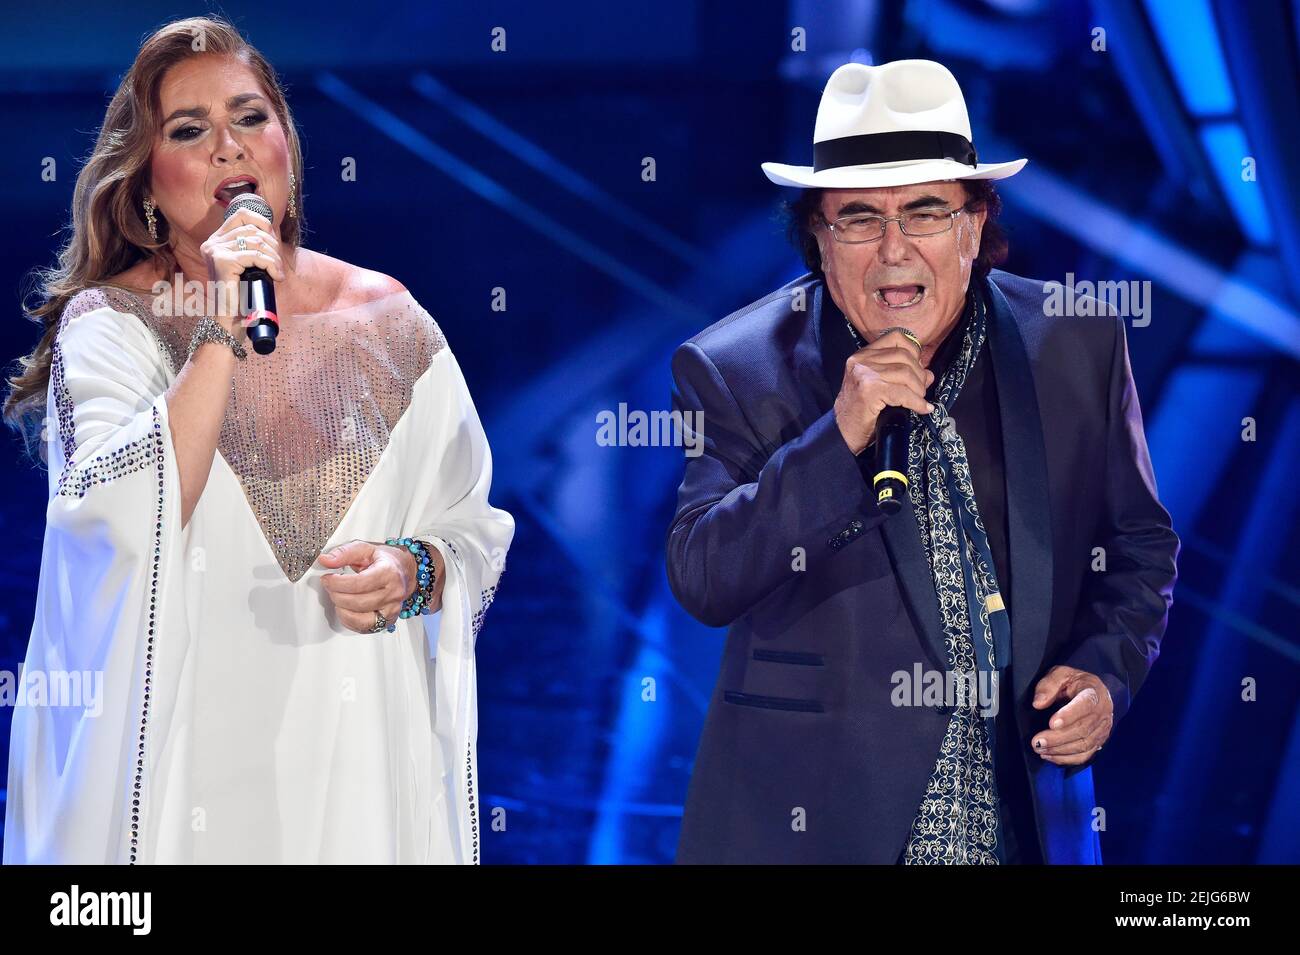 Romina Power, Al Bano at the first evening of the 70th Sanremo Music  Festival. Sanremo (Italy), February 4th, 2020Romina Power, Al Bano (Albano  Carrisi) at the first evening of the 70th Sanremo